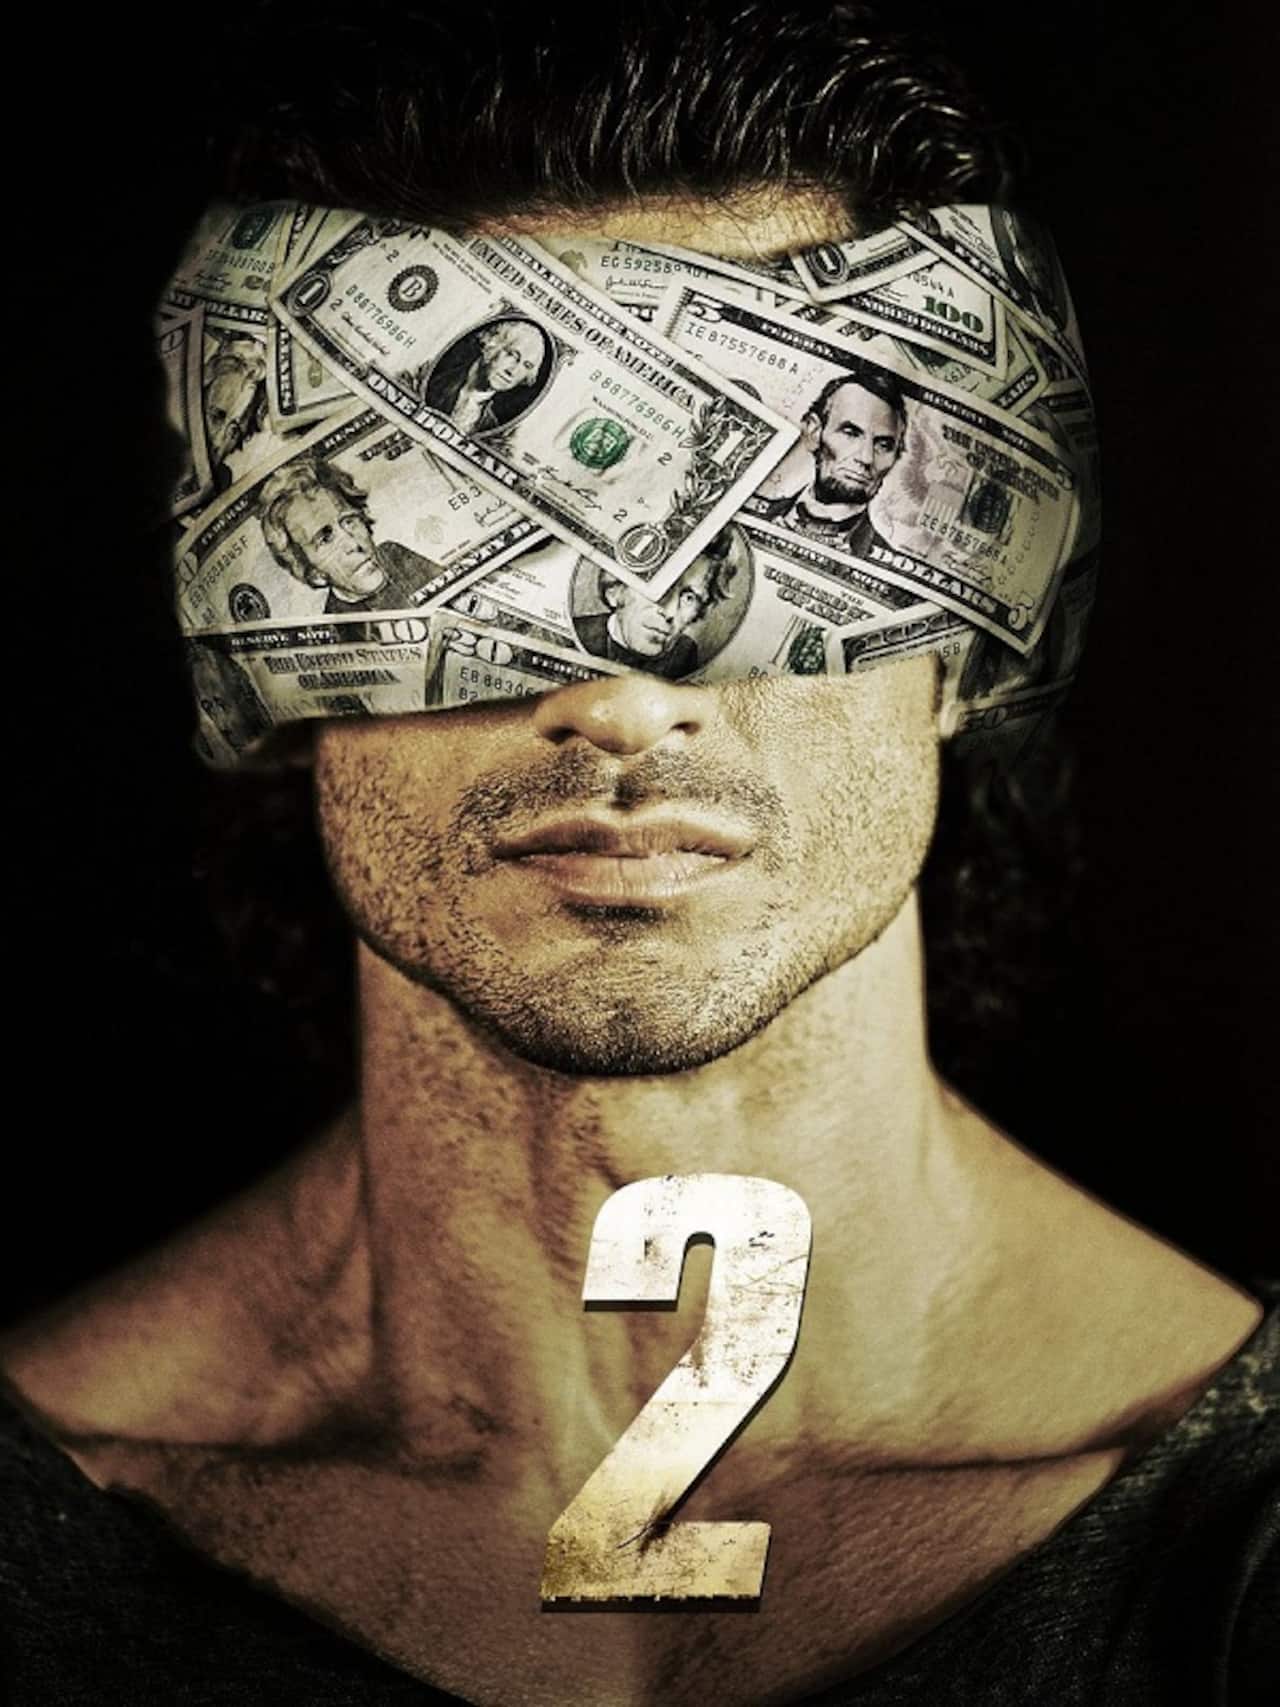 Commando 2 teaser poster: Vidyut Jammwal's 'blindfolded' act looks mysterious but is quite unoriginal